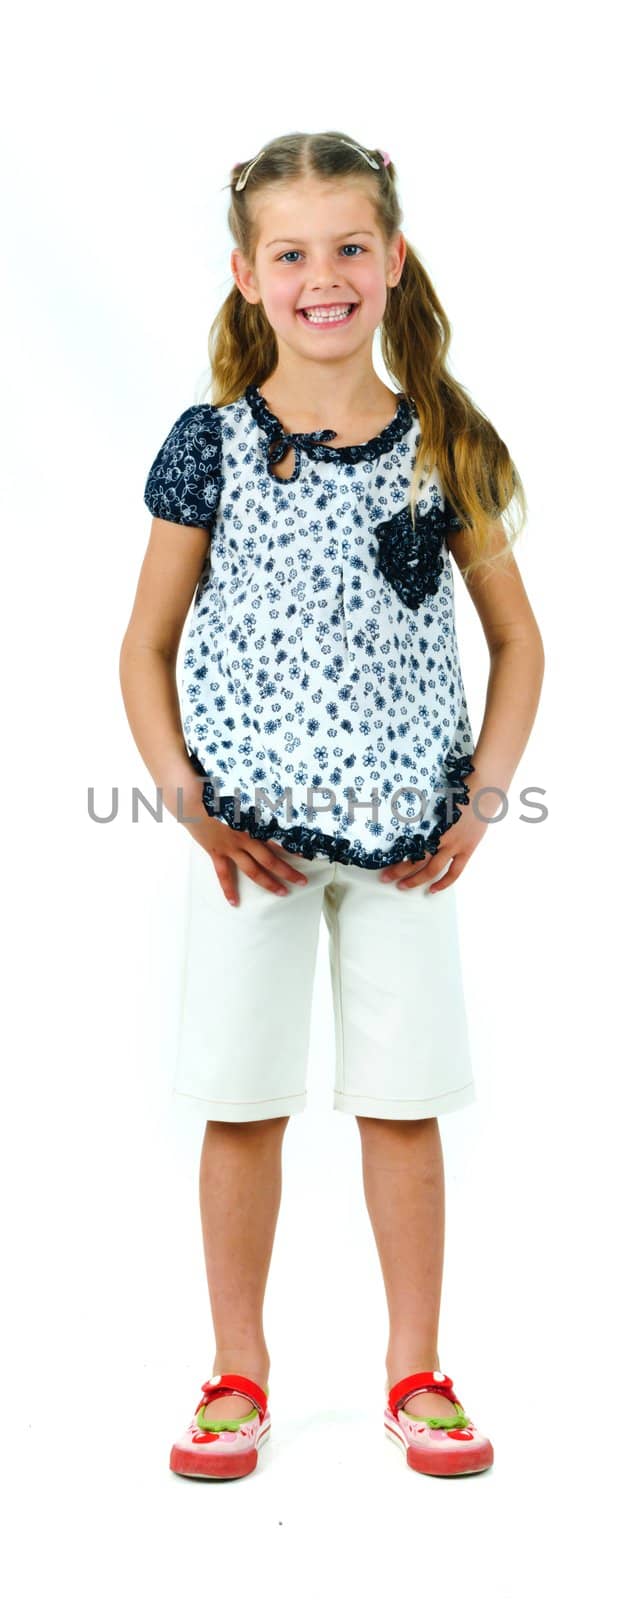 photo of cute little girl on white background